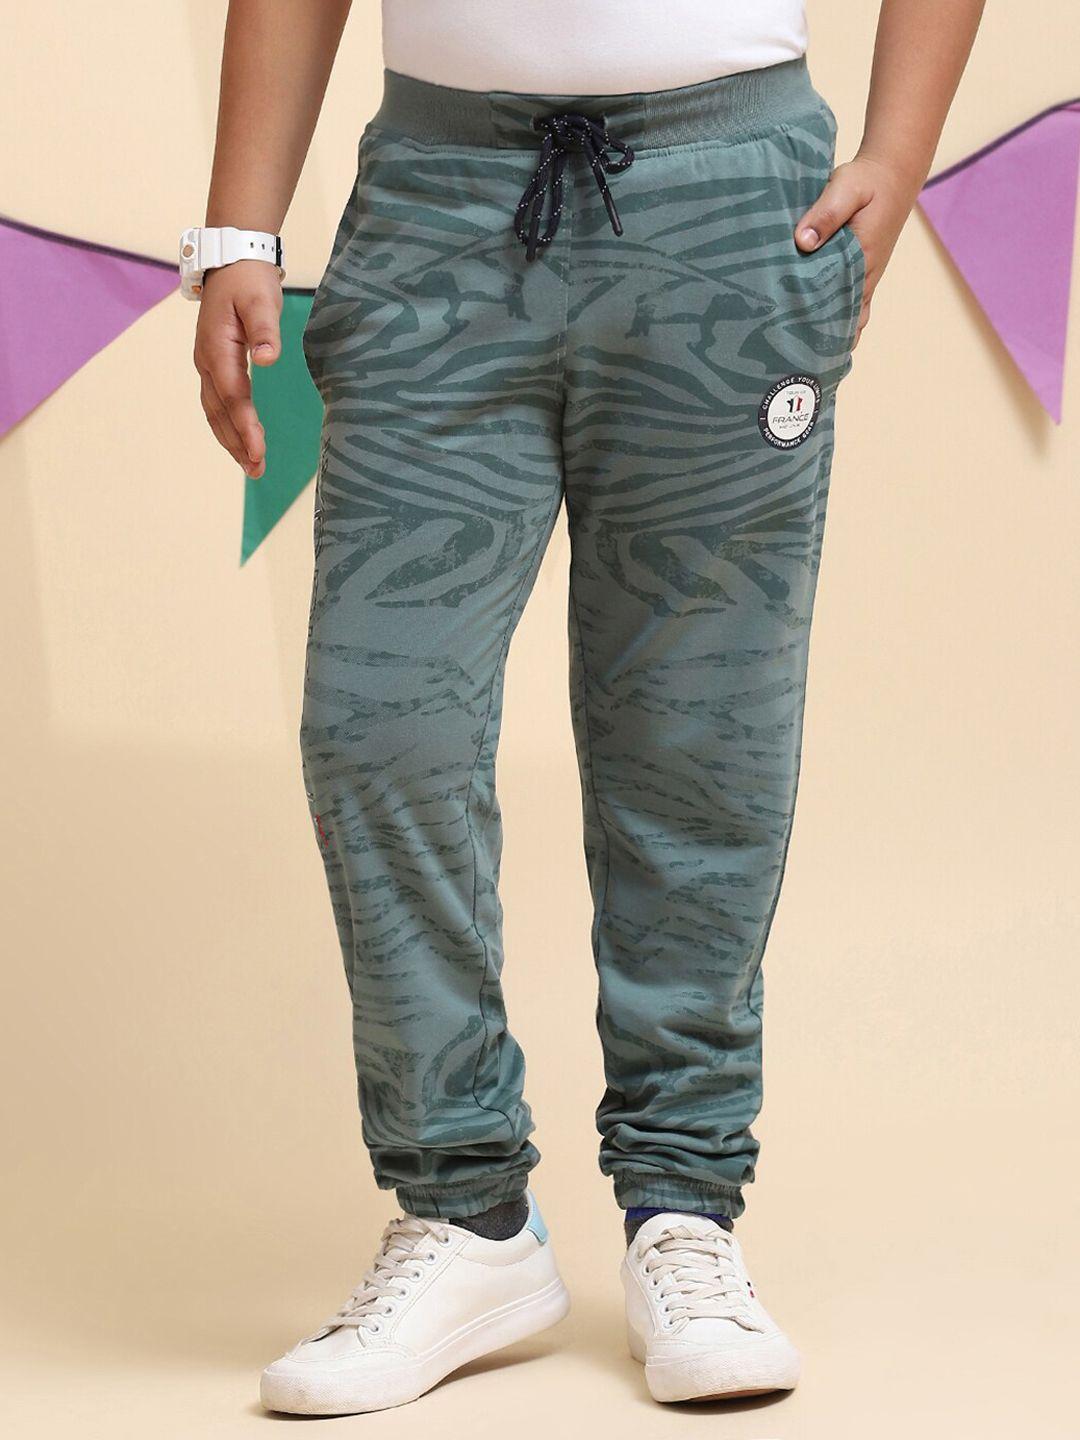 monte carlo boys abstract printed regular fit joggers